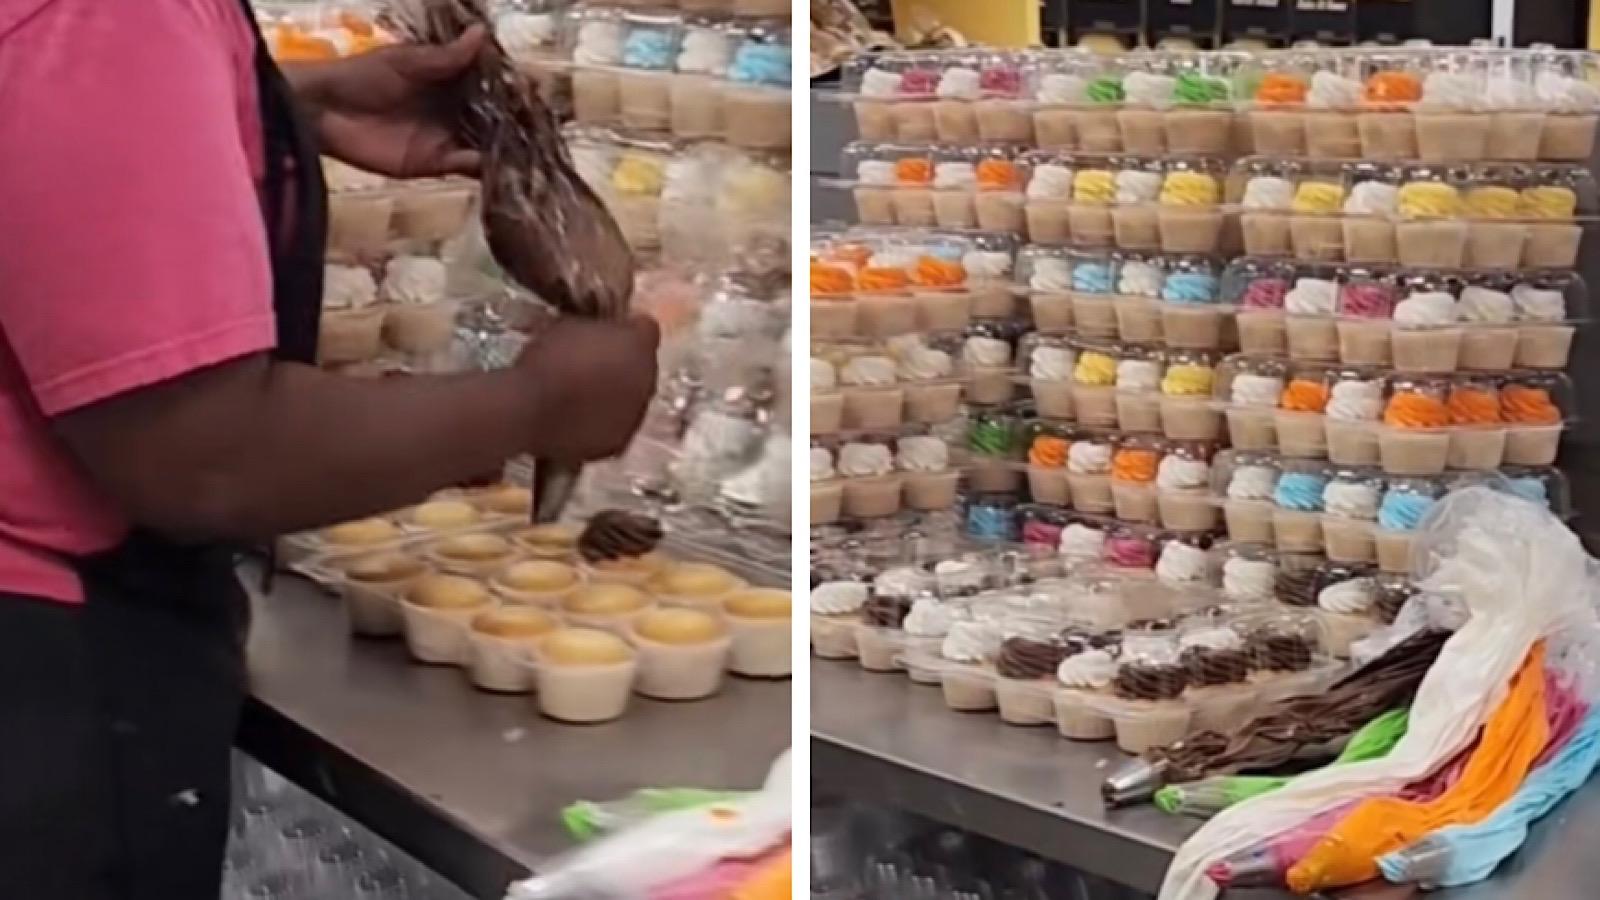 Walmart employee exposed the store for selling frozen cupcakes